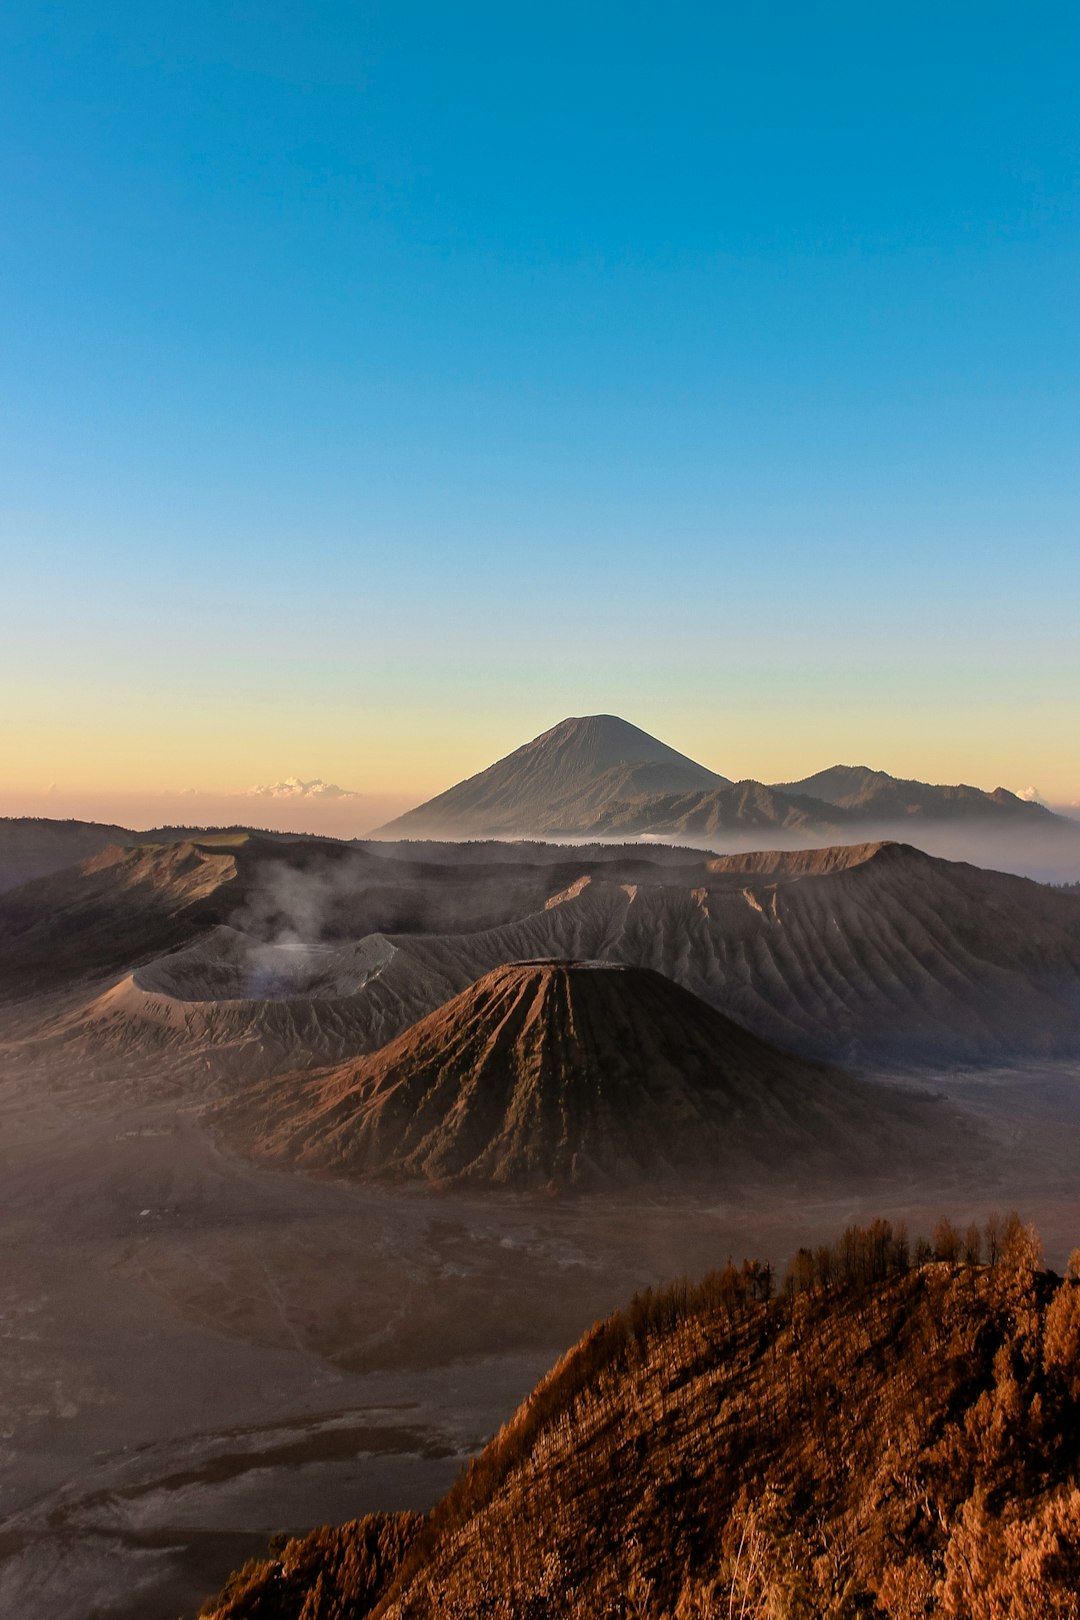 travelers stories about Hill in Mount Bromo, Indonesia